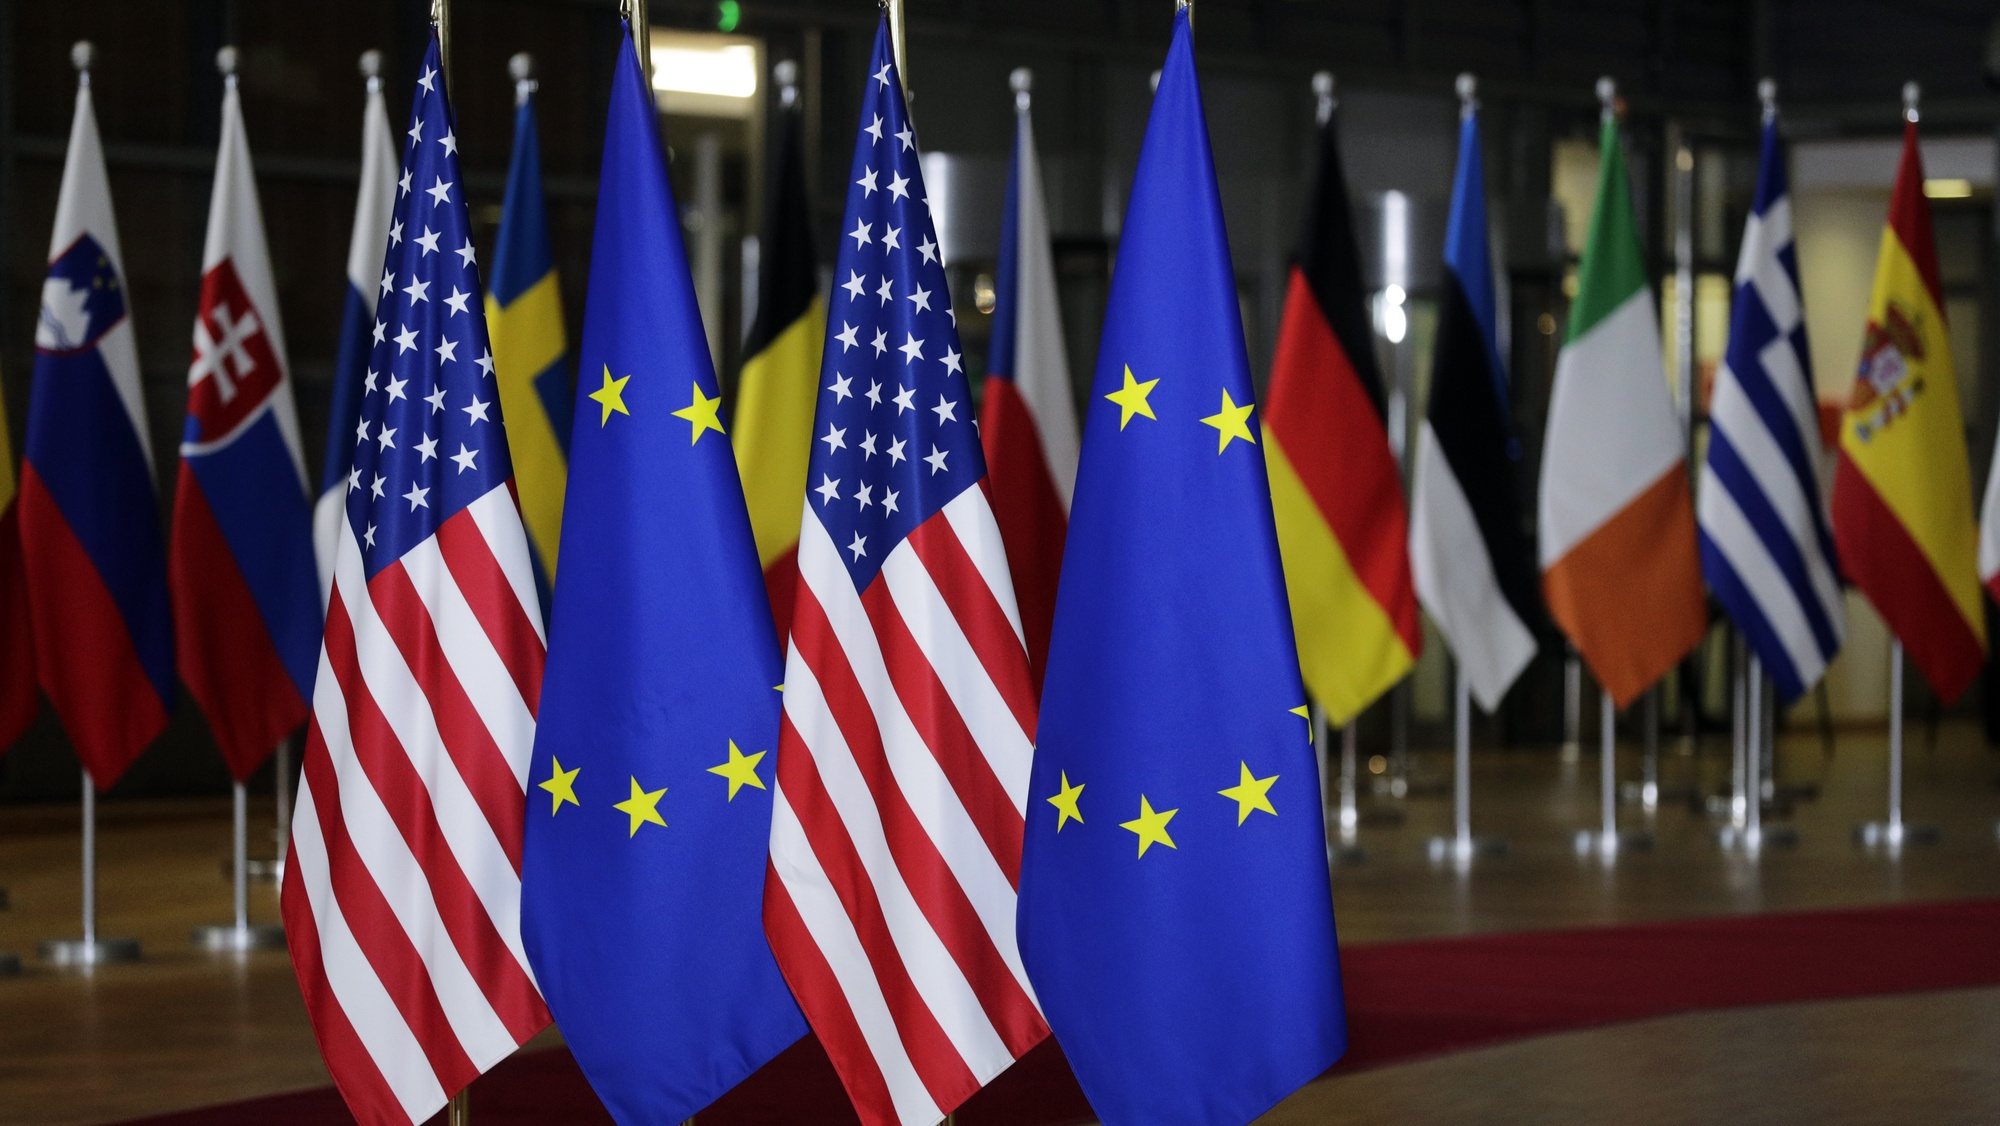 epa09847066 US and EU flags are set up for US president Joe Biden arrival for a European Council Summit in Brussels, Belgium, 24 March 2022. The European Council summit starts with the participation of US President Joe Biden to address Russia&#039;s ongoing military aggression against Ukraine. After that, Head of states will continue discussions on how best to support Ukraine in these dramatic circumstances.  EPA/OLIVIER HOSLET